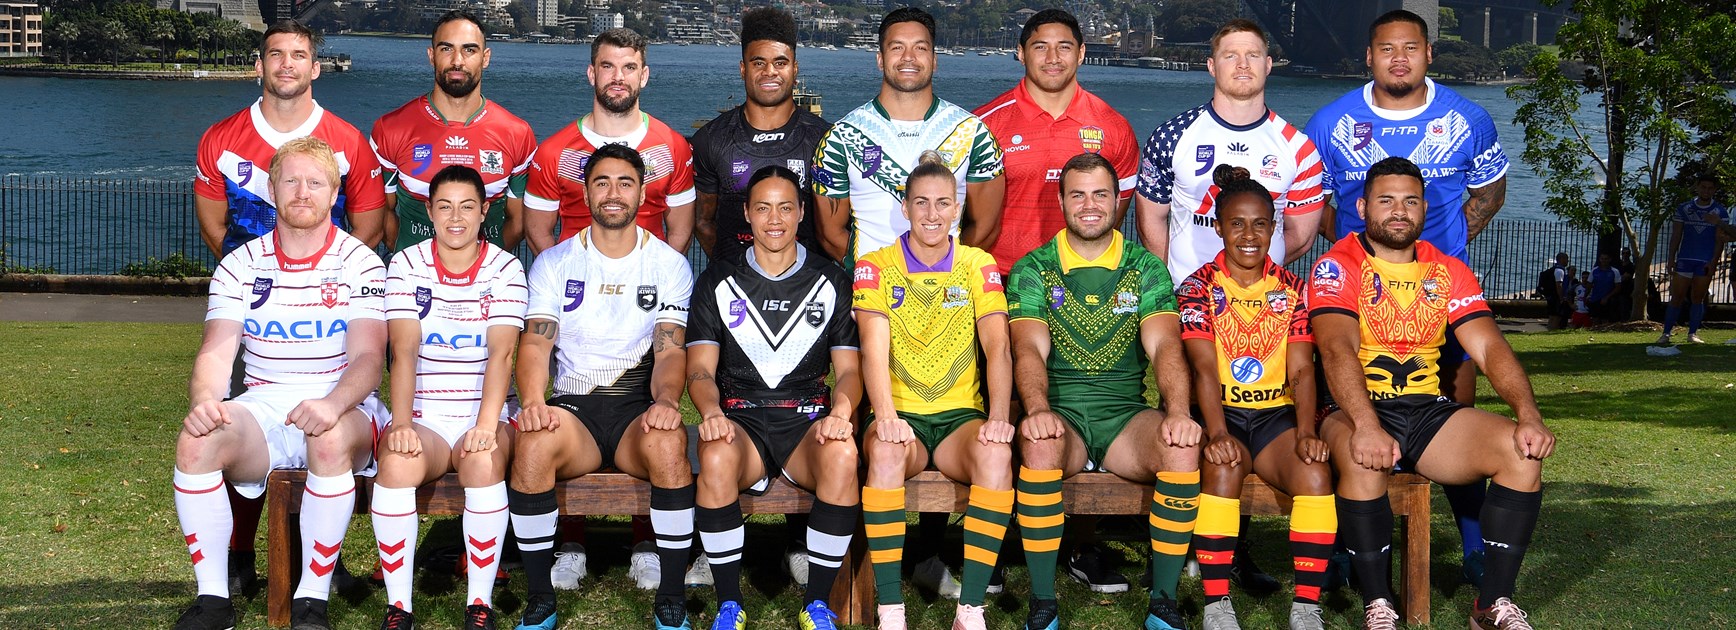 The men's and women's captains for the World Cup 9s.